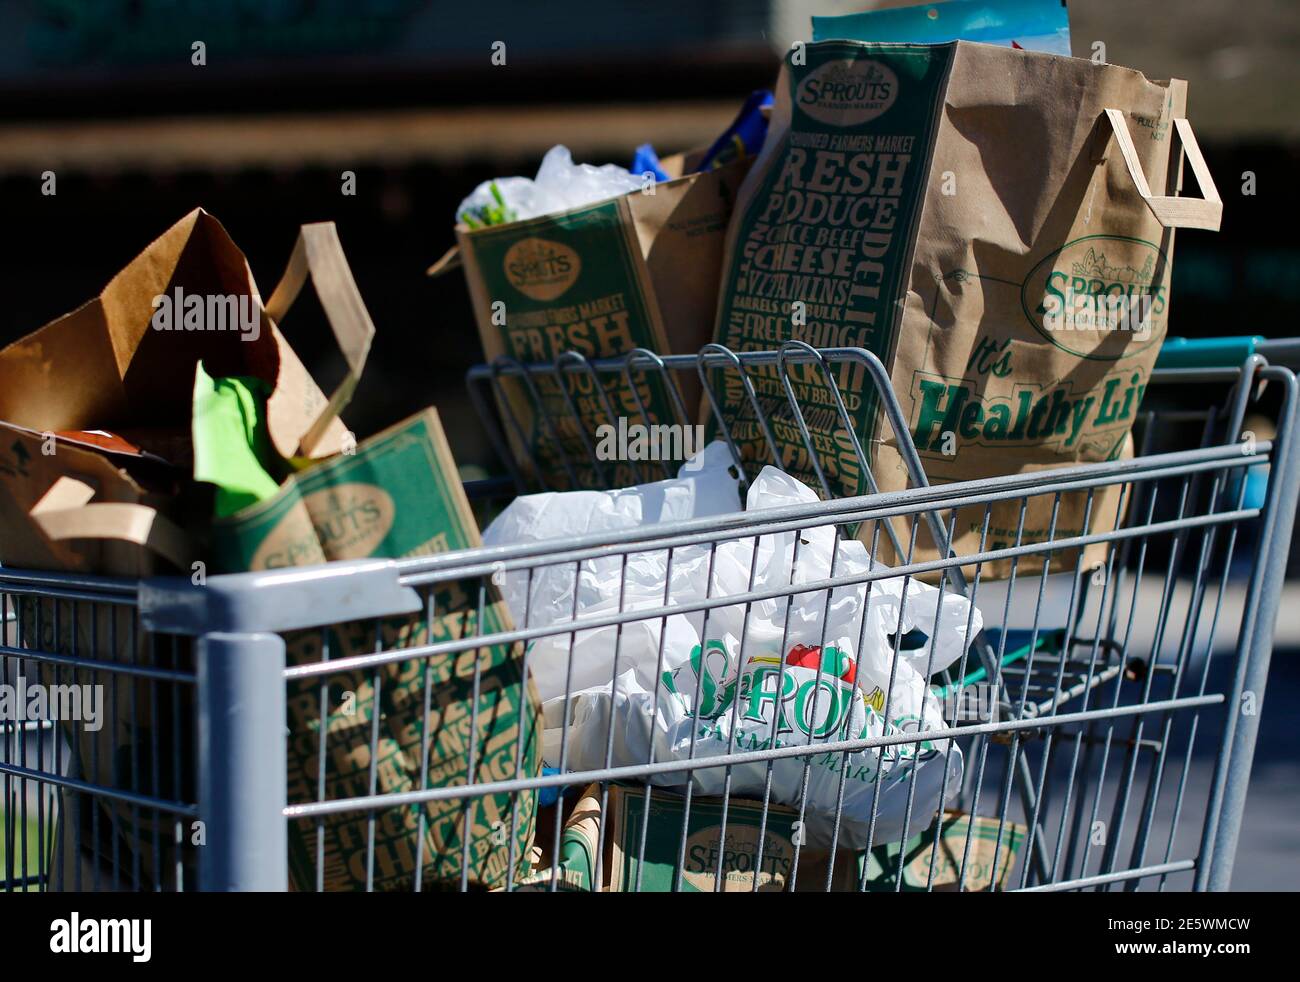 A shopper's grocery cart containing both paper and plastic bags is seen in San Diego, California September 30, 2014. Single-use plastic bags are set to disappear from California grocery stores over the next two years under a first-in-the-nation state law signed on Tuesday by Democratic Governor Jerry Brown, despite opposition from bag manufacturers.      REUTERS/Mike Blake (UNITED STATES - Tags: BUSINESS ENVIRONMENT) Stock Photo